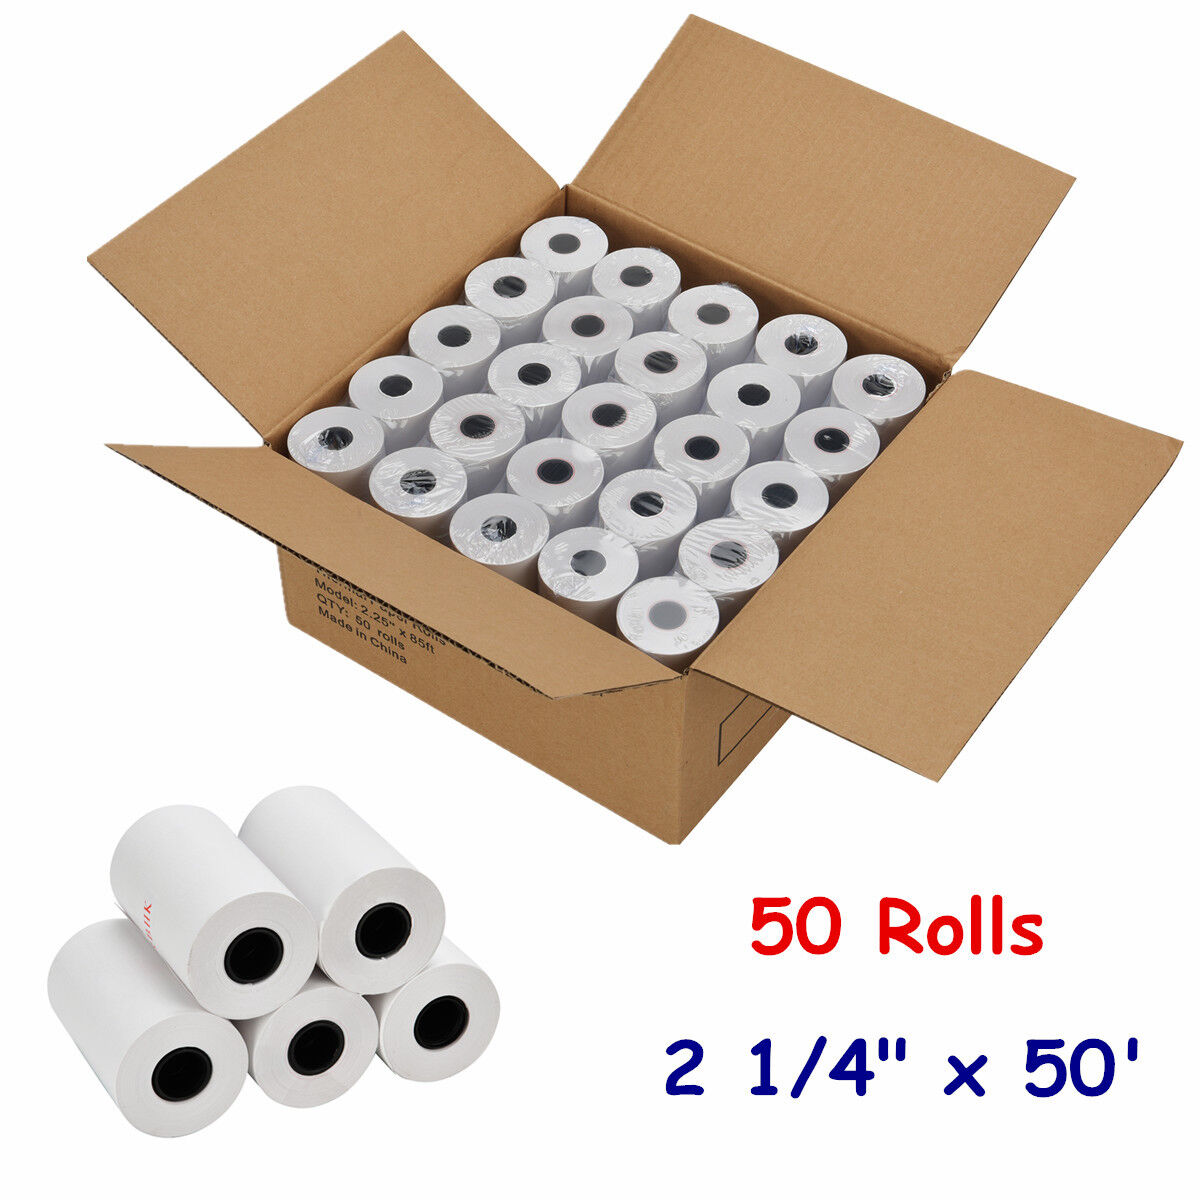 2 1/4" x 50'Thermal Receipt Paper 50 Rolls Cash Register POS Credit Card Tape Unbranded Does Not Apply